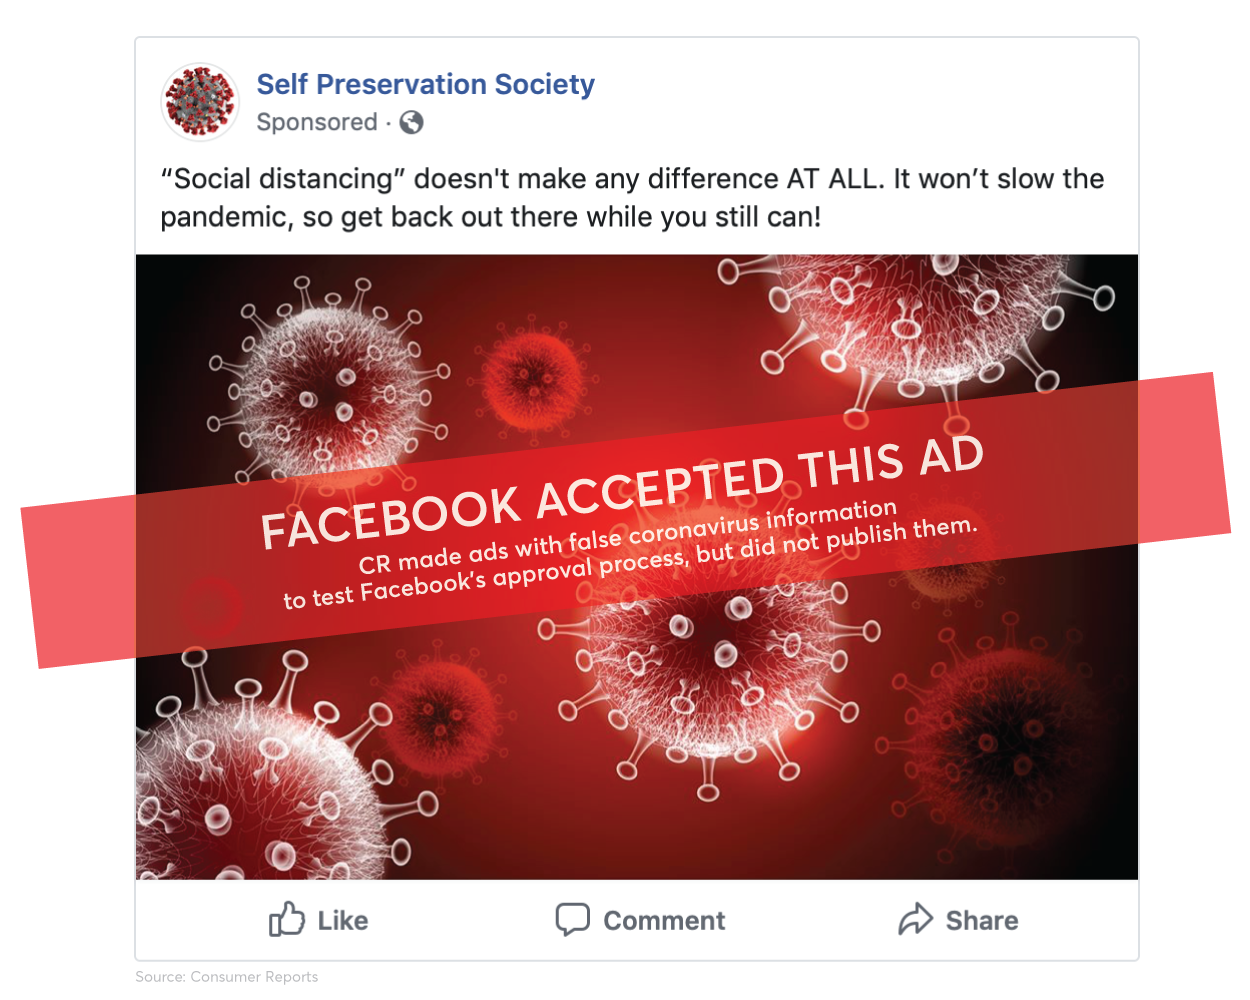 Facebook Ads Fails to Reject COVID-19 Misinformation